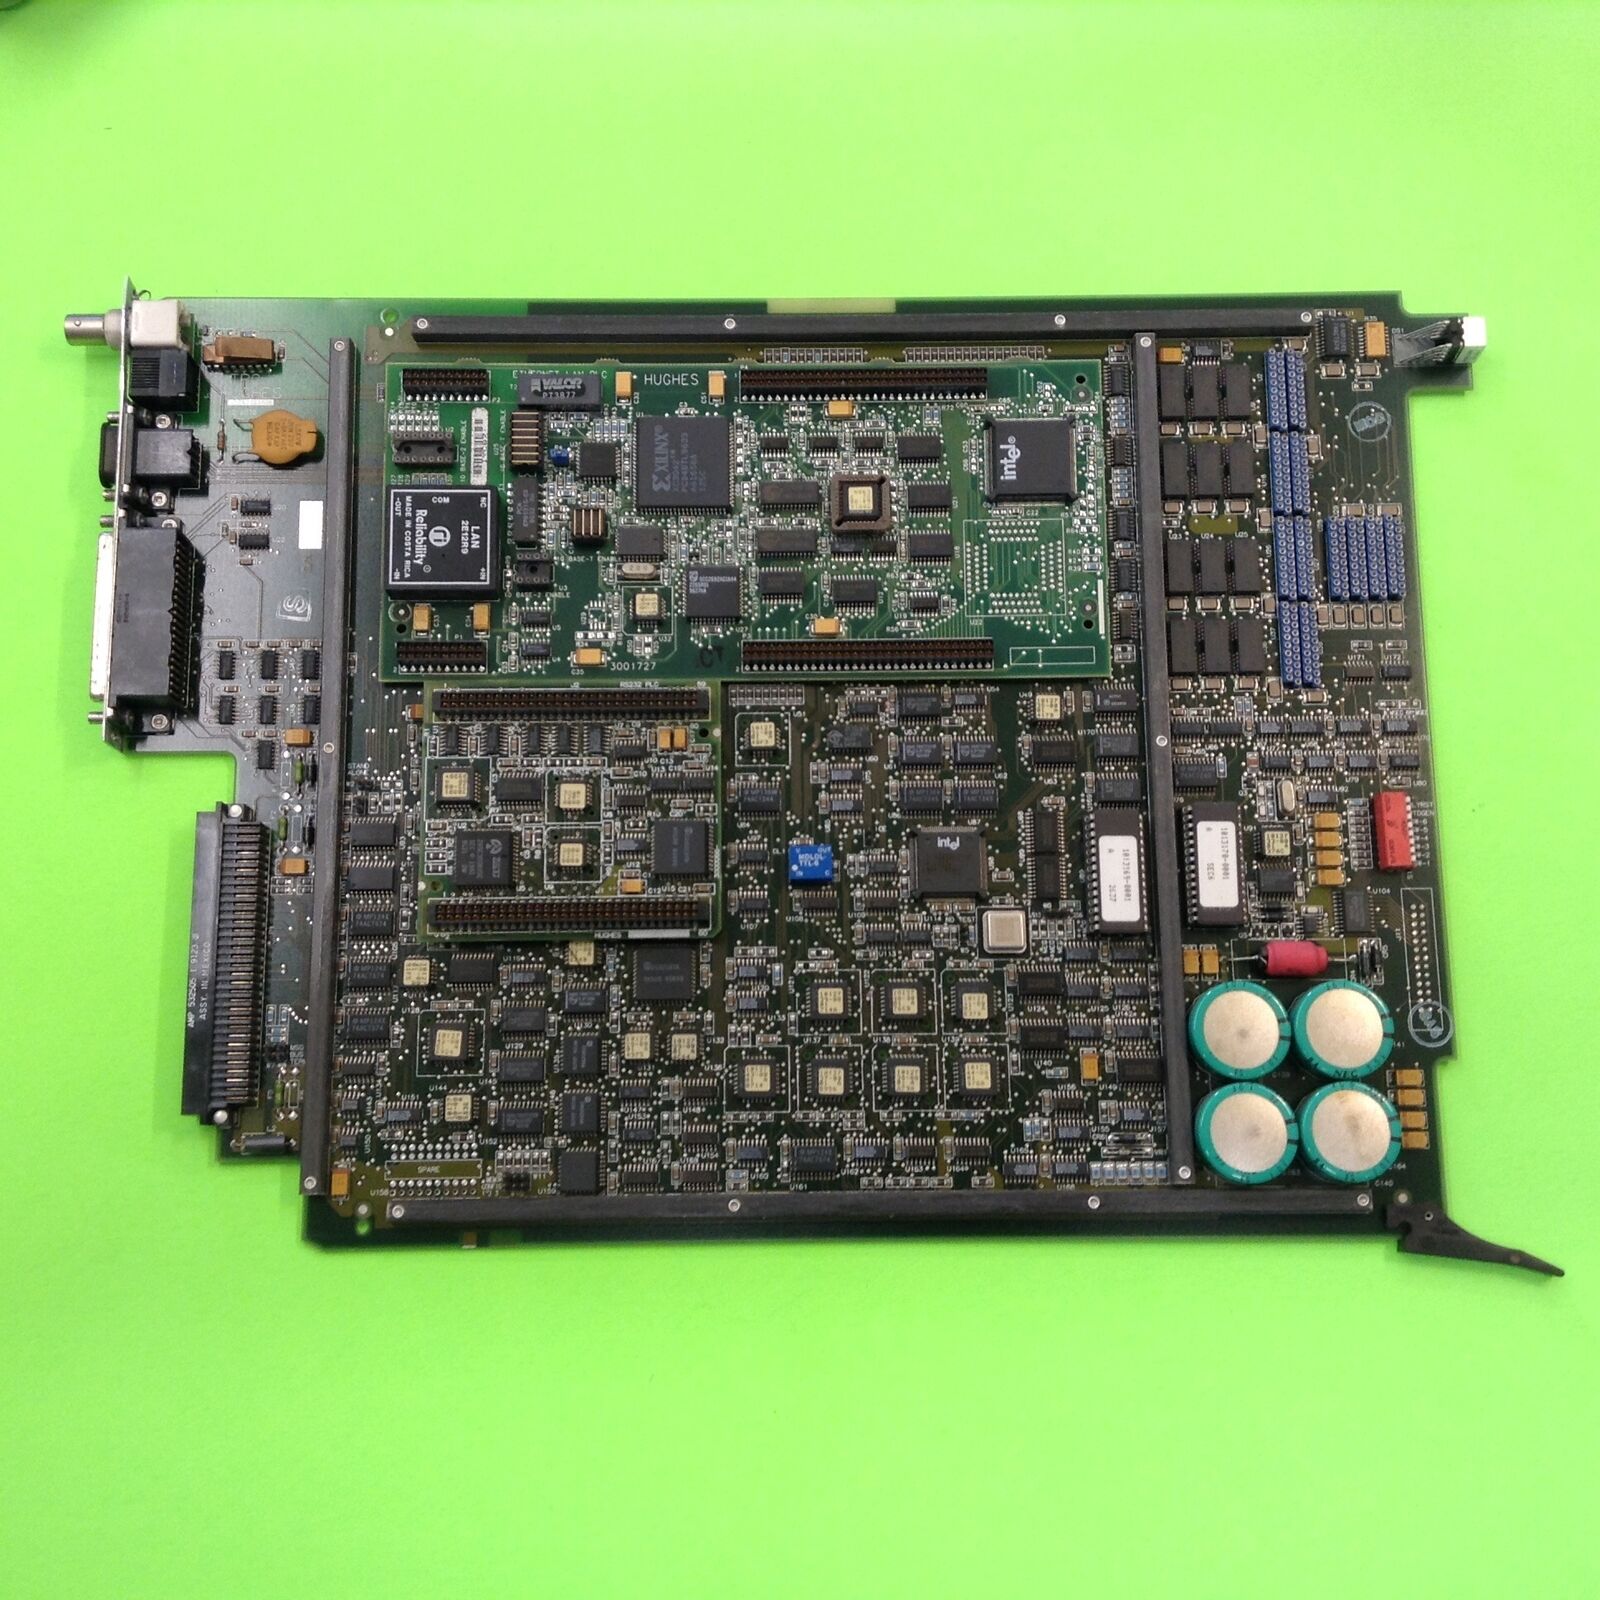 Hughes 8000 Personal Earth Station PC System Board Motherboard 1012076-0001 Re